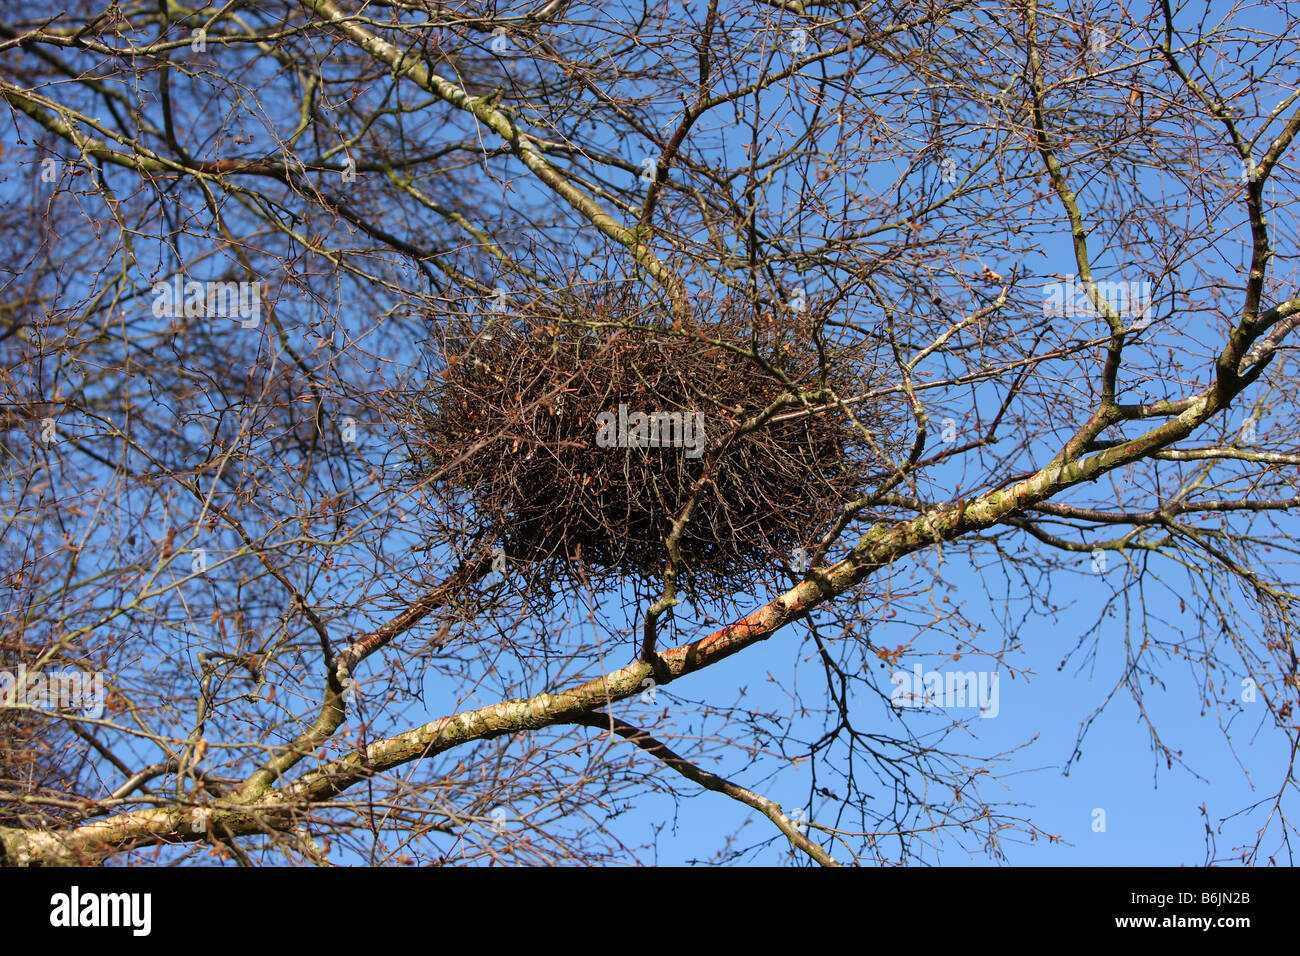 Witches broom growth on birch tree Stock Photo